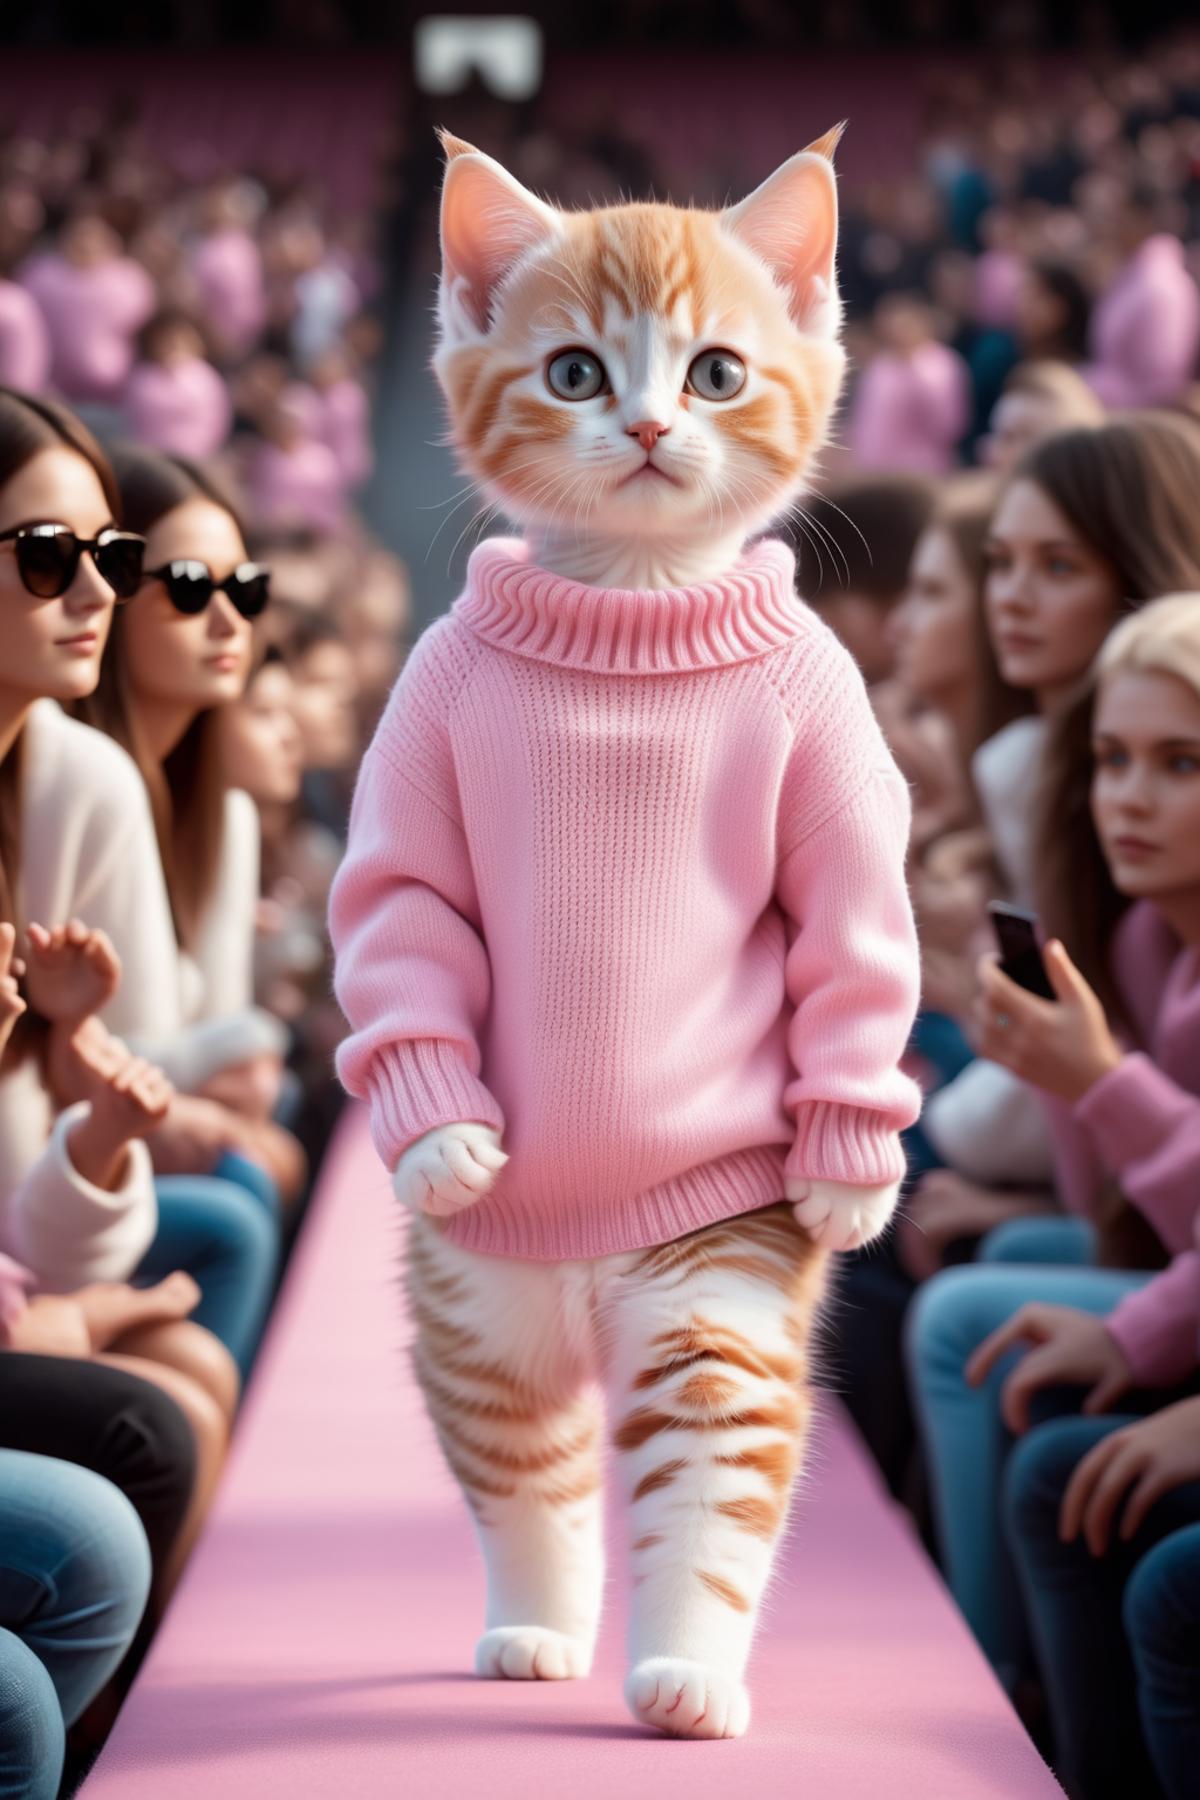 Orange Tabby Cat Modeling a Pink Sweater on a Runway with an Audience Watching